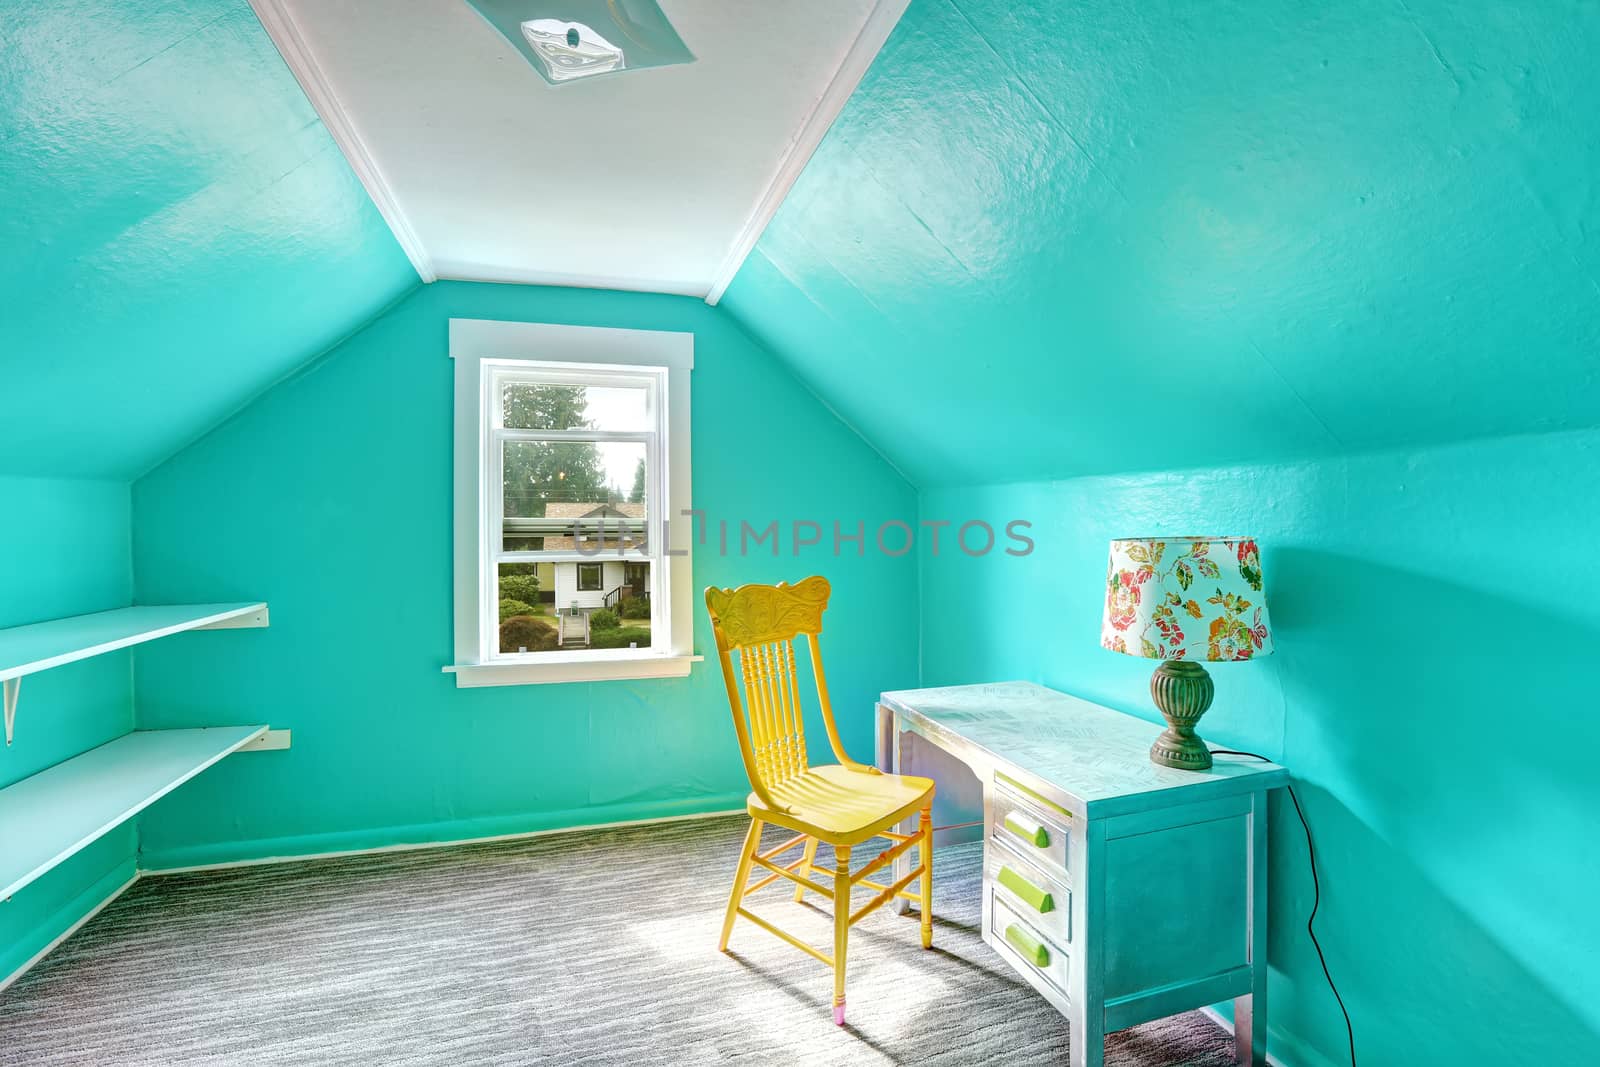 Small bright turquoise room with vaulted ceiling and shelves attached to the wall. Room has desk and chair